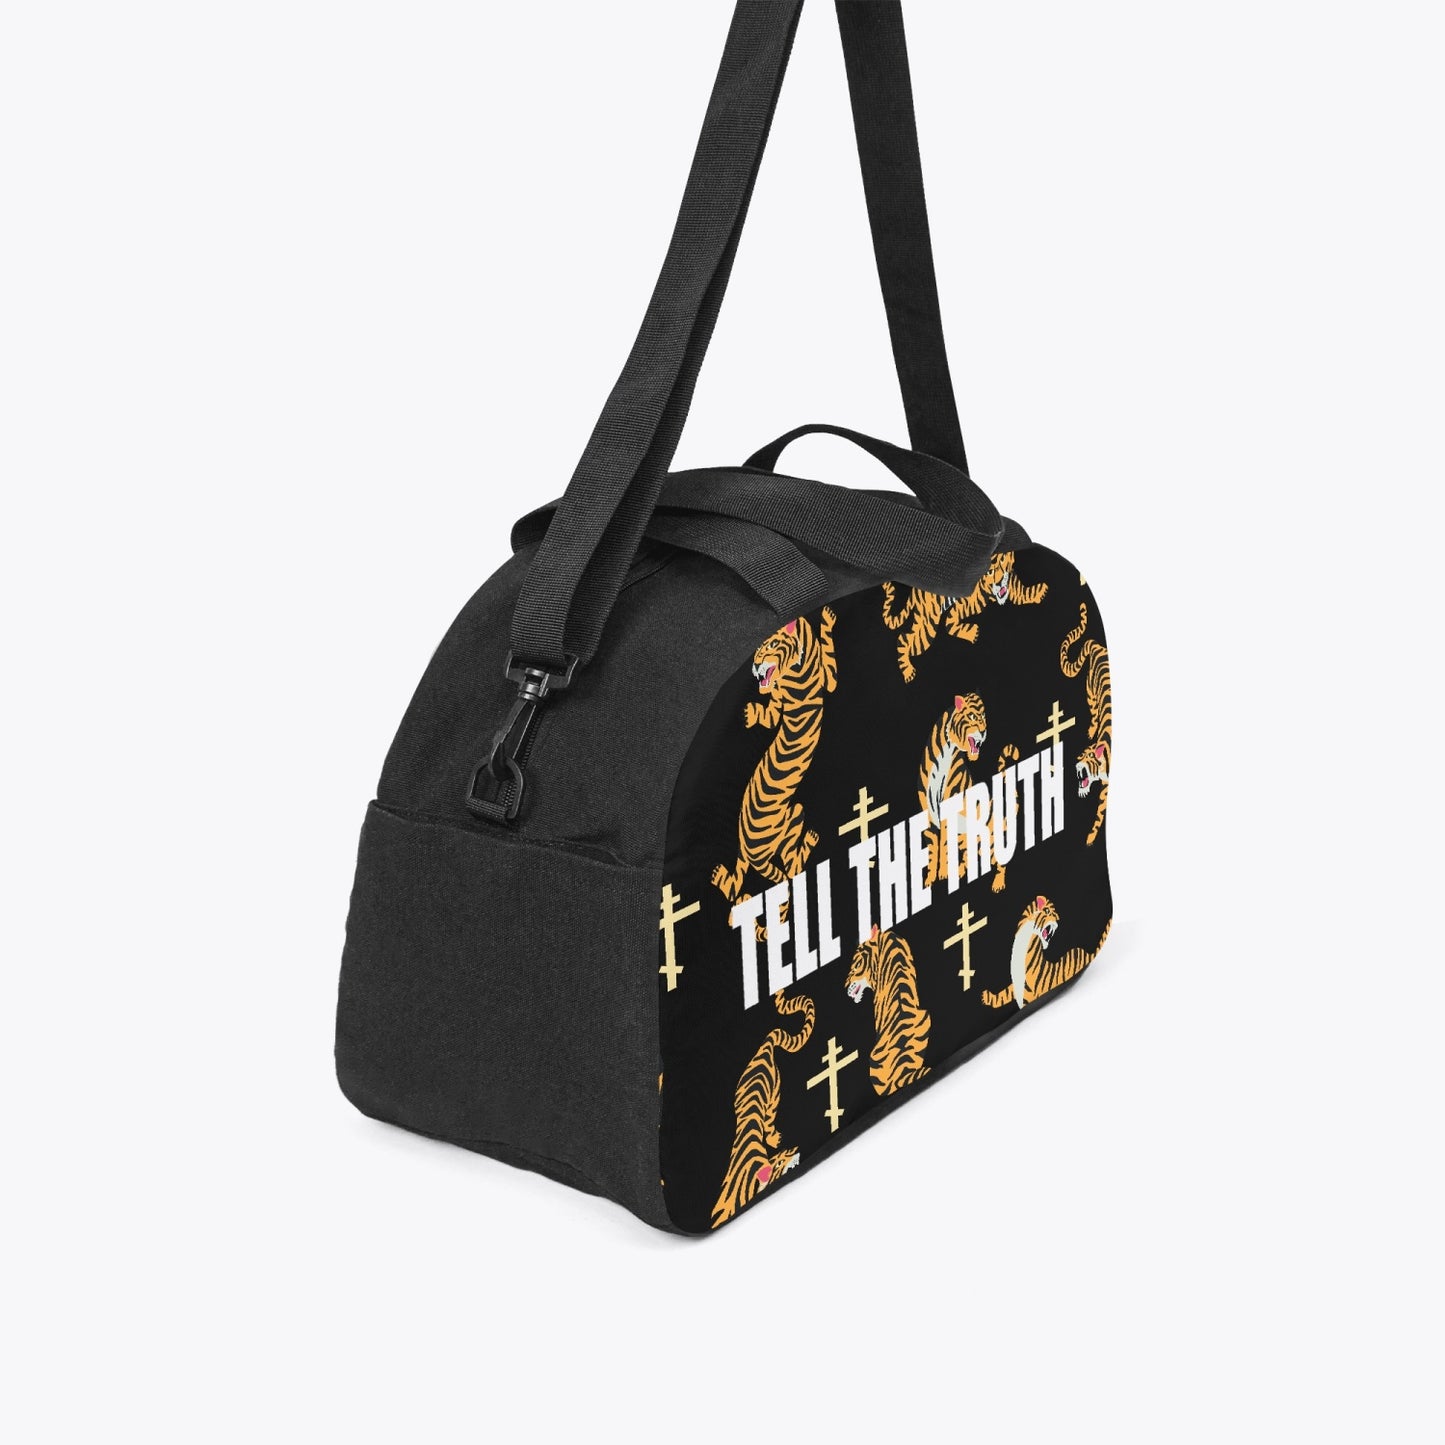 TELL THE TRUTH  Travel Luggage Bag